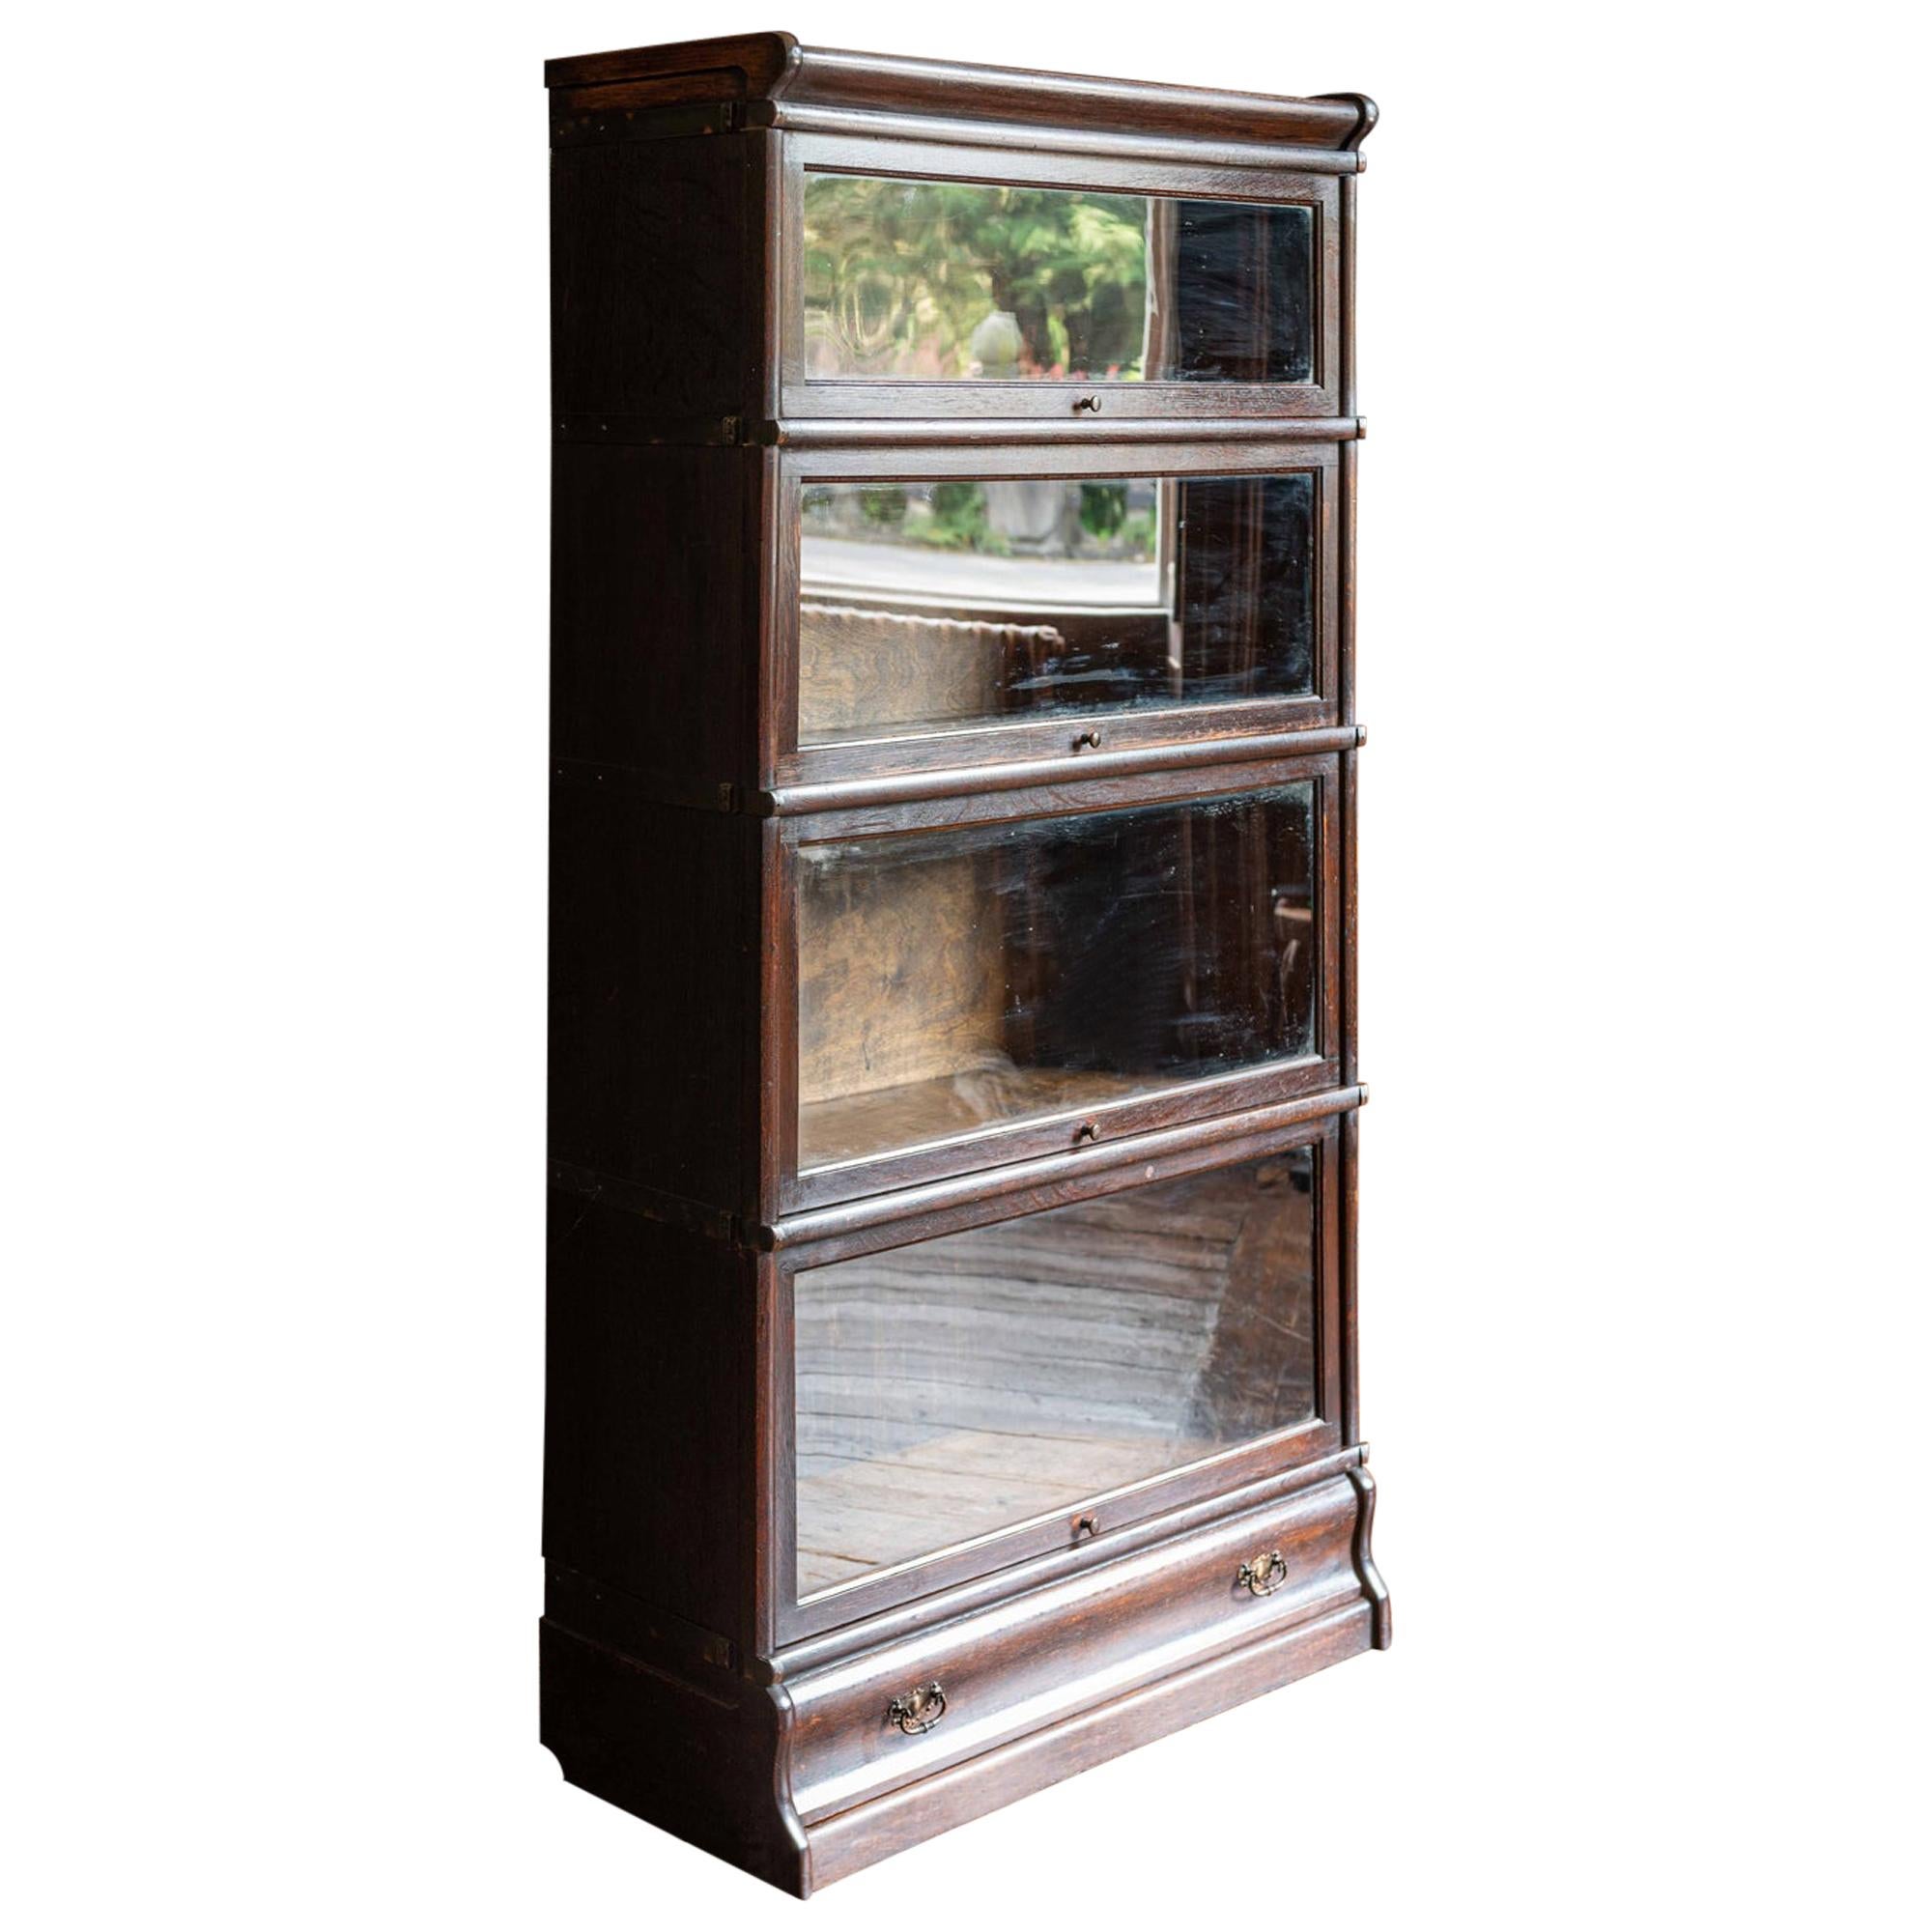 Oak Globe Wernicke five sections bookcase
circa 1900.

Stacking sectional bookcase by Globe Wenicke in oak, comprising, from the top down, 4 glazed sections, a long drawer and a plinth base. Dating from the early 1900's .

Measures: W 87 x H